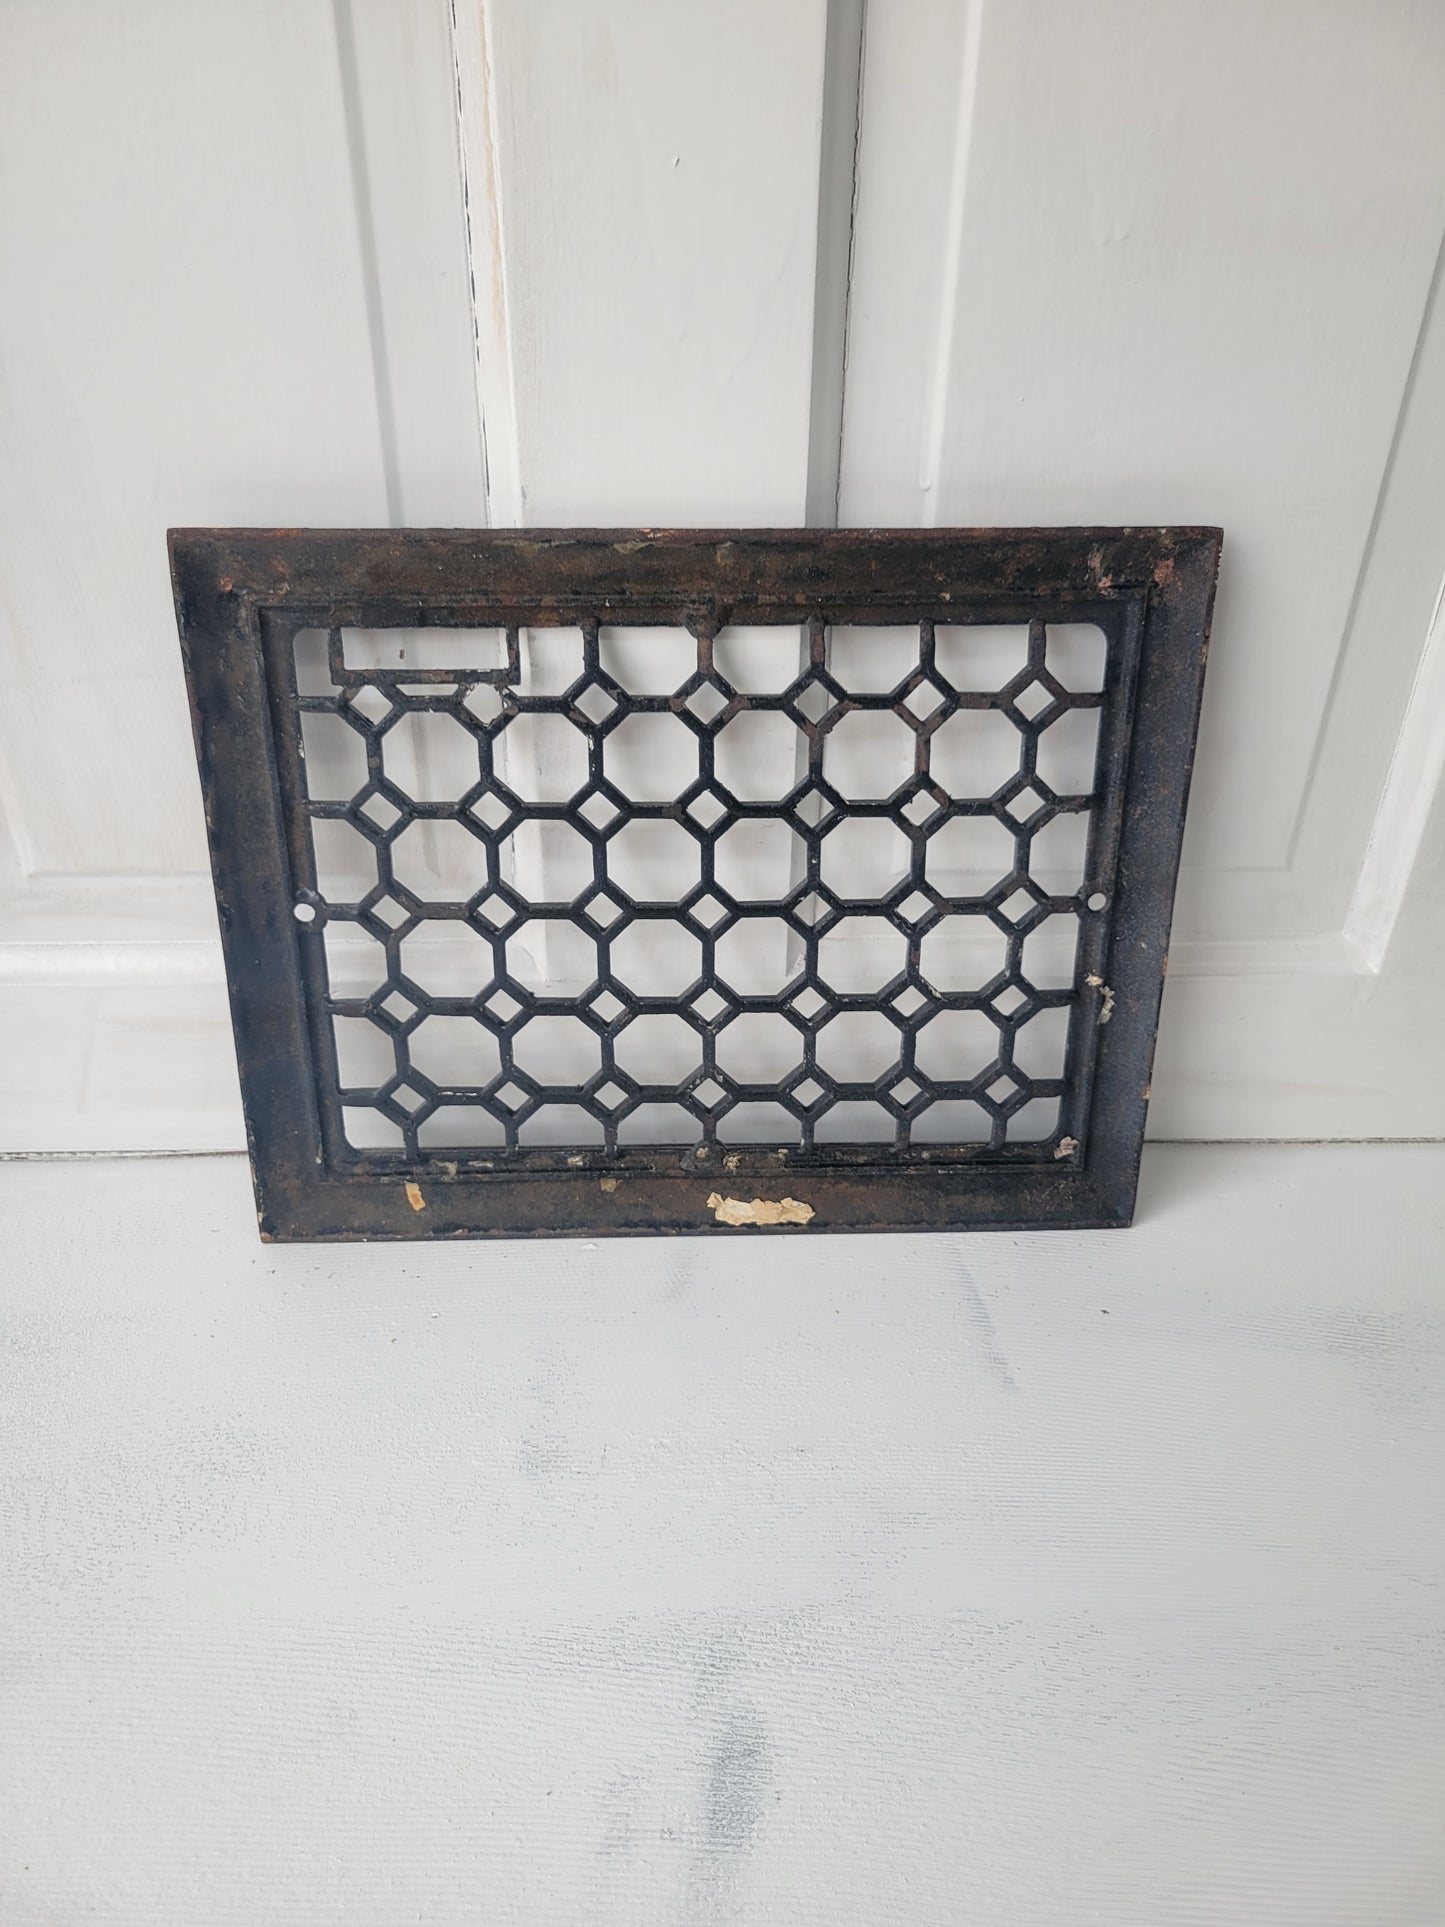 14 x 11 Antique Decorative Iron Wall Vent Cover, Wall Vent Register Cover with Dampers #042202